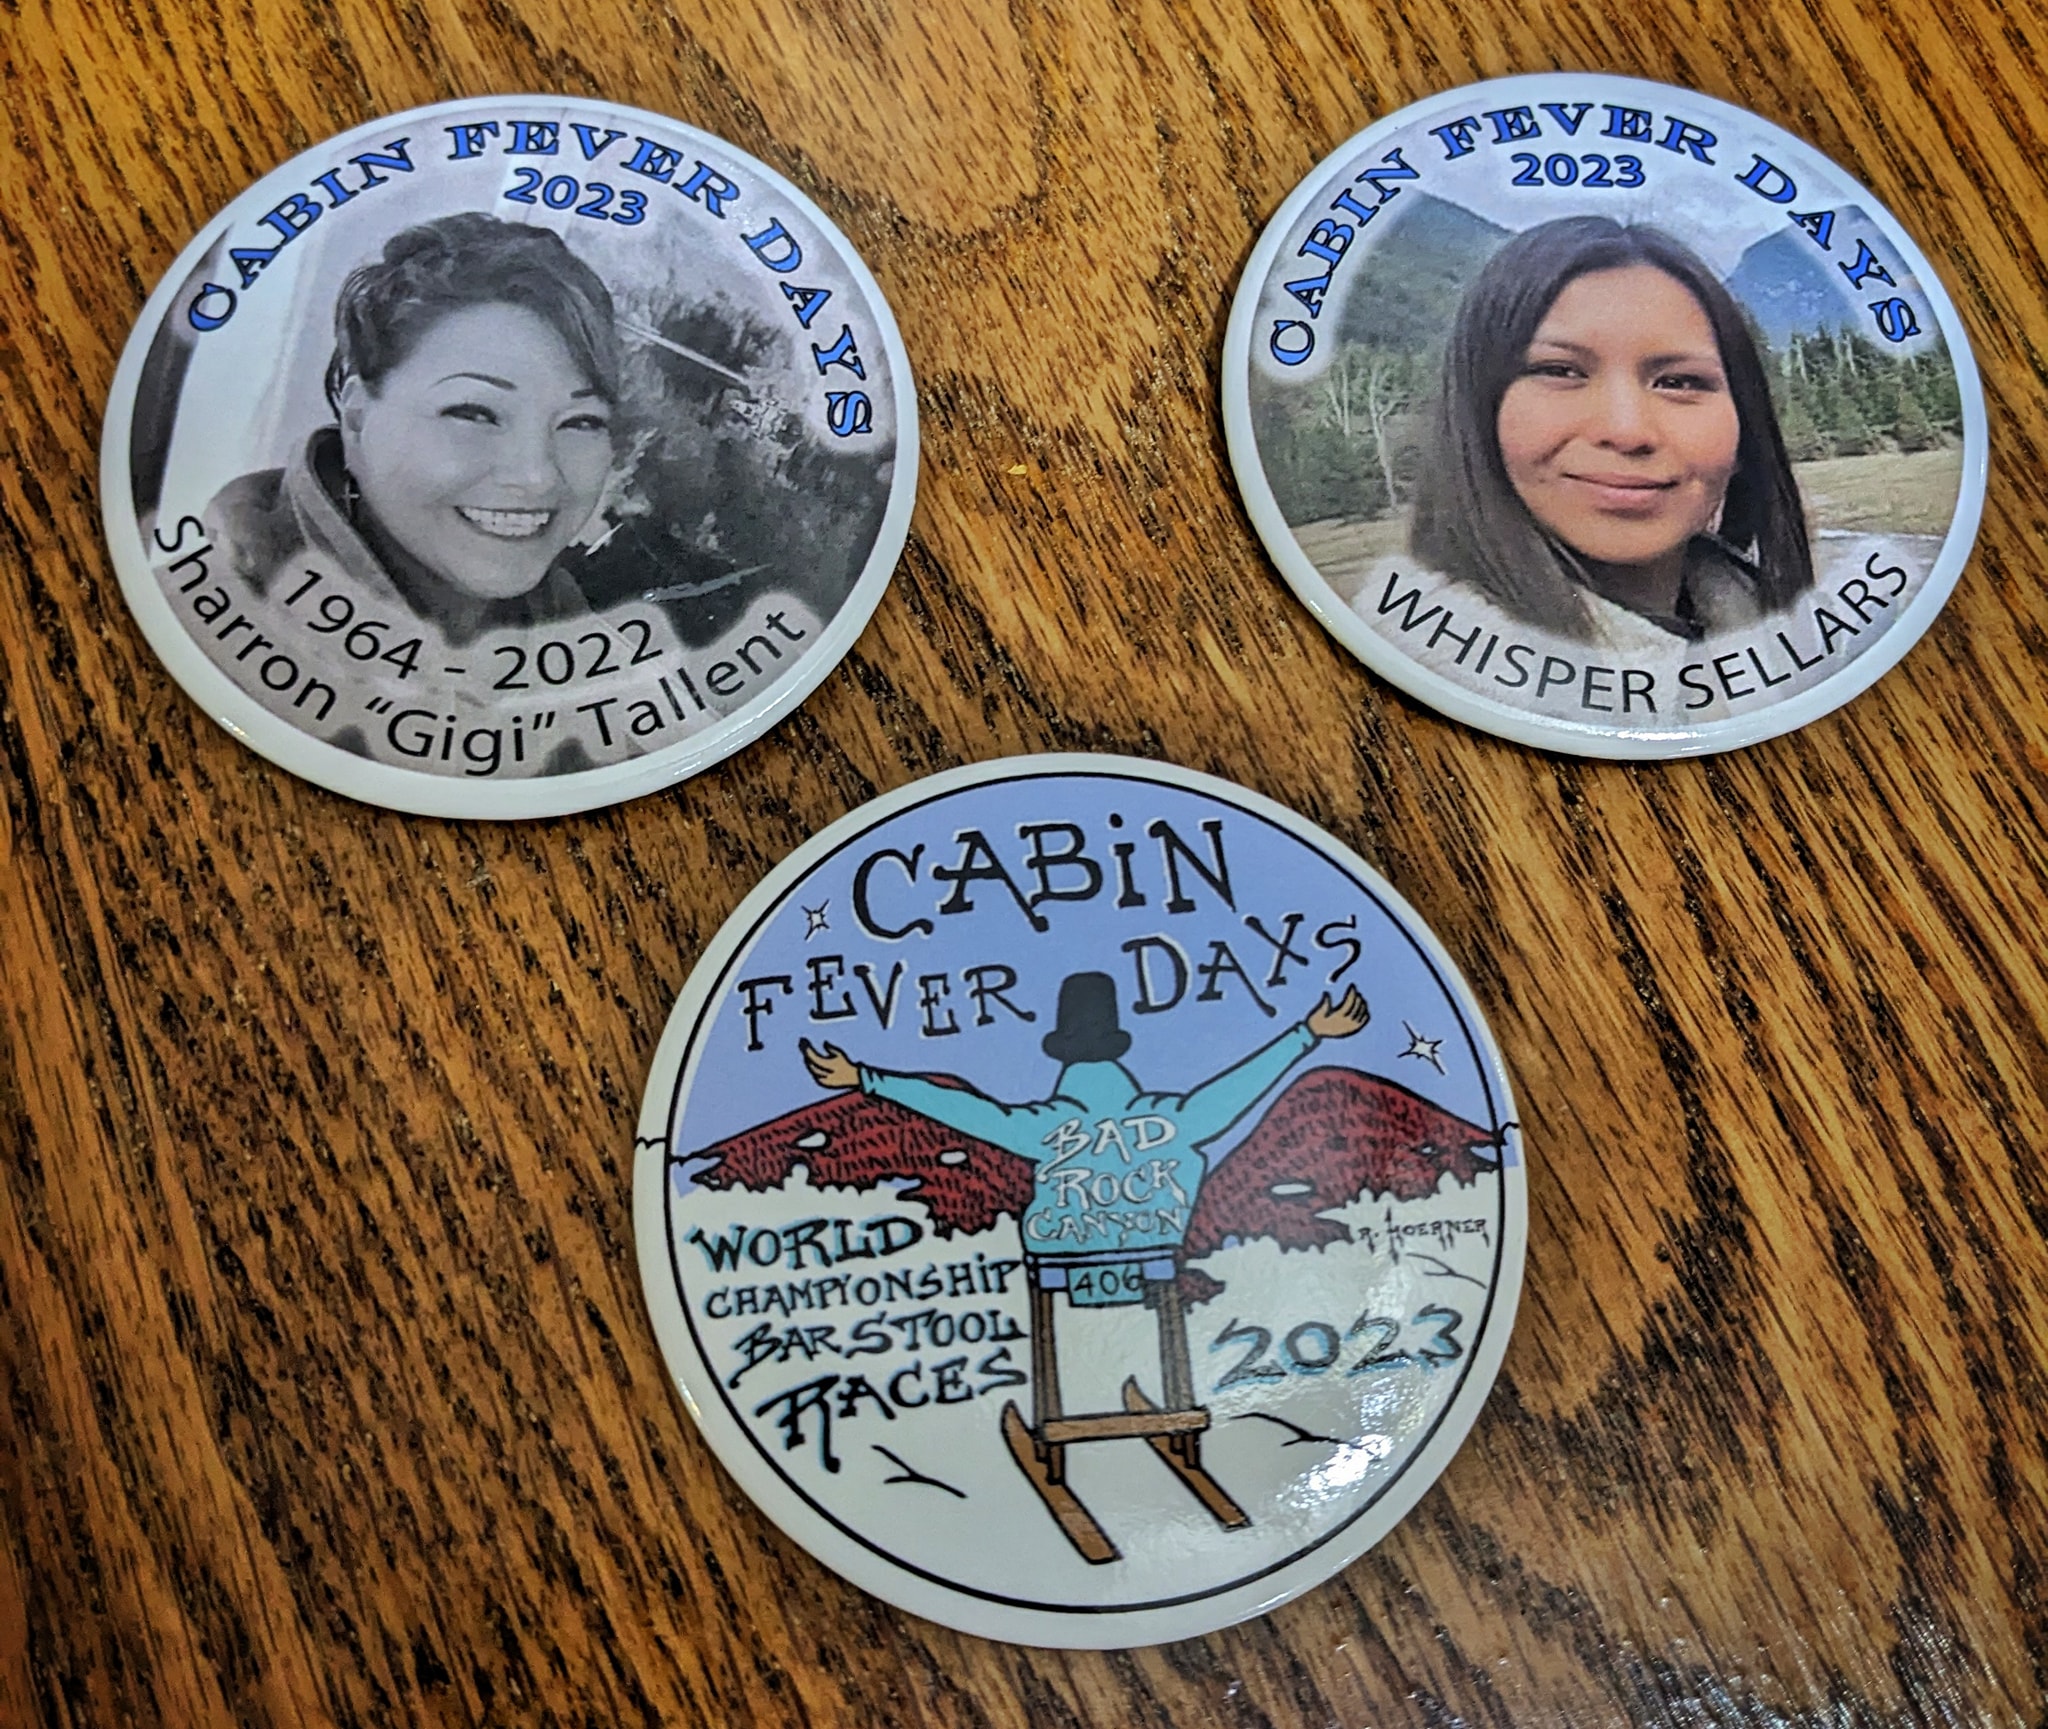 2023 Cabin Fever Days Buttons